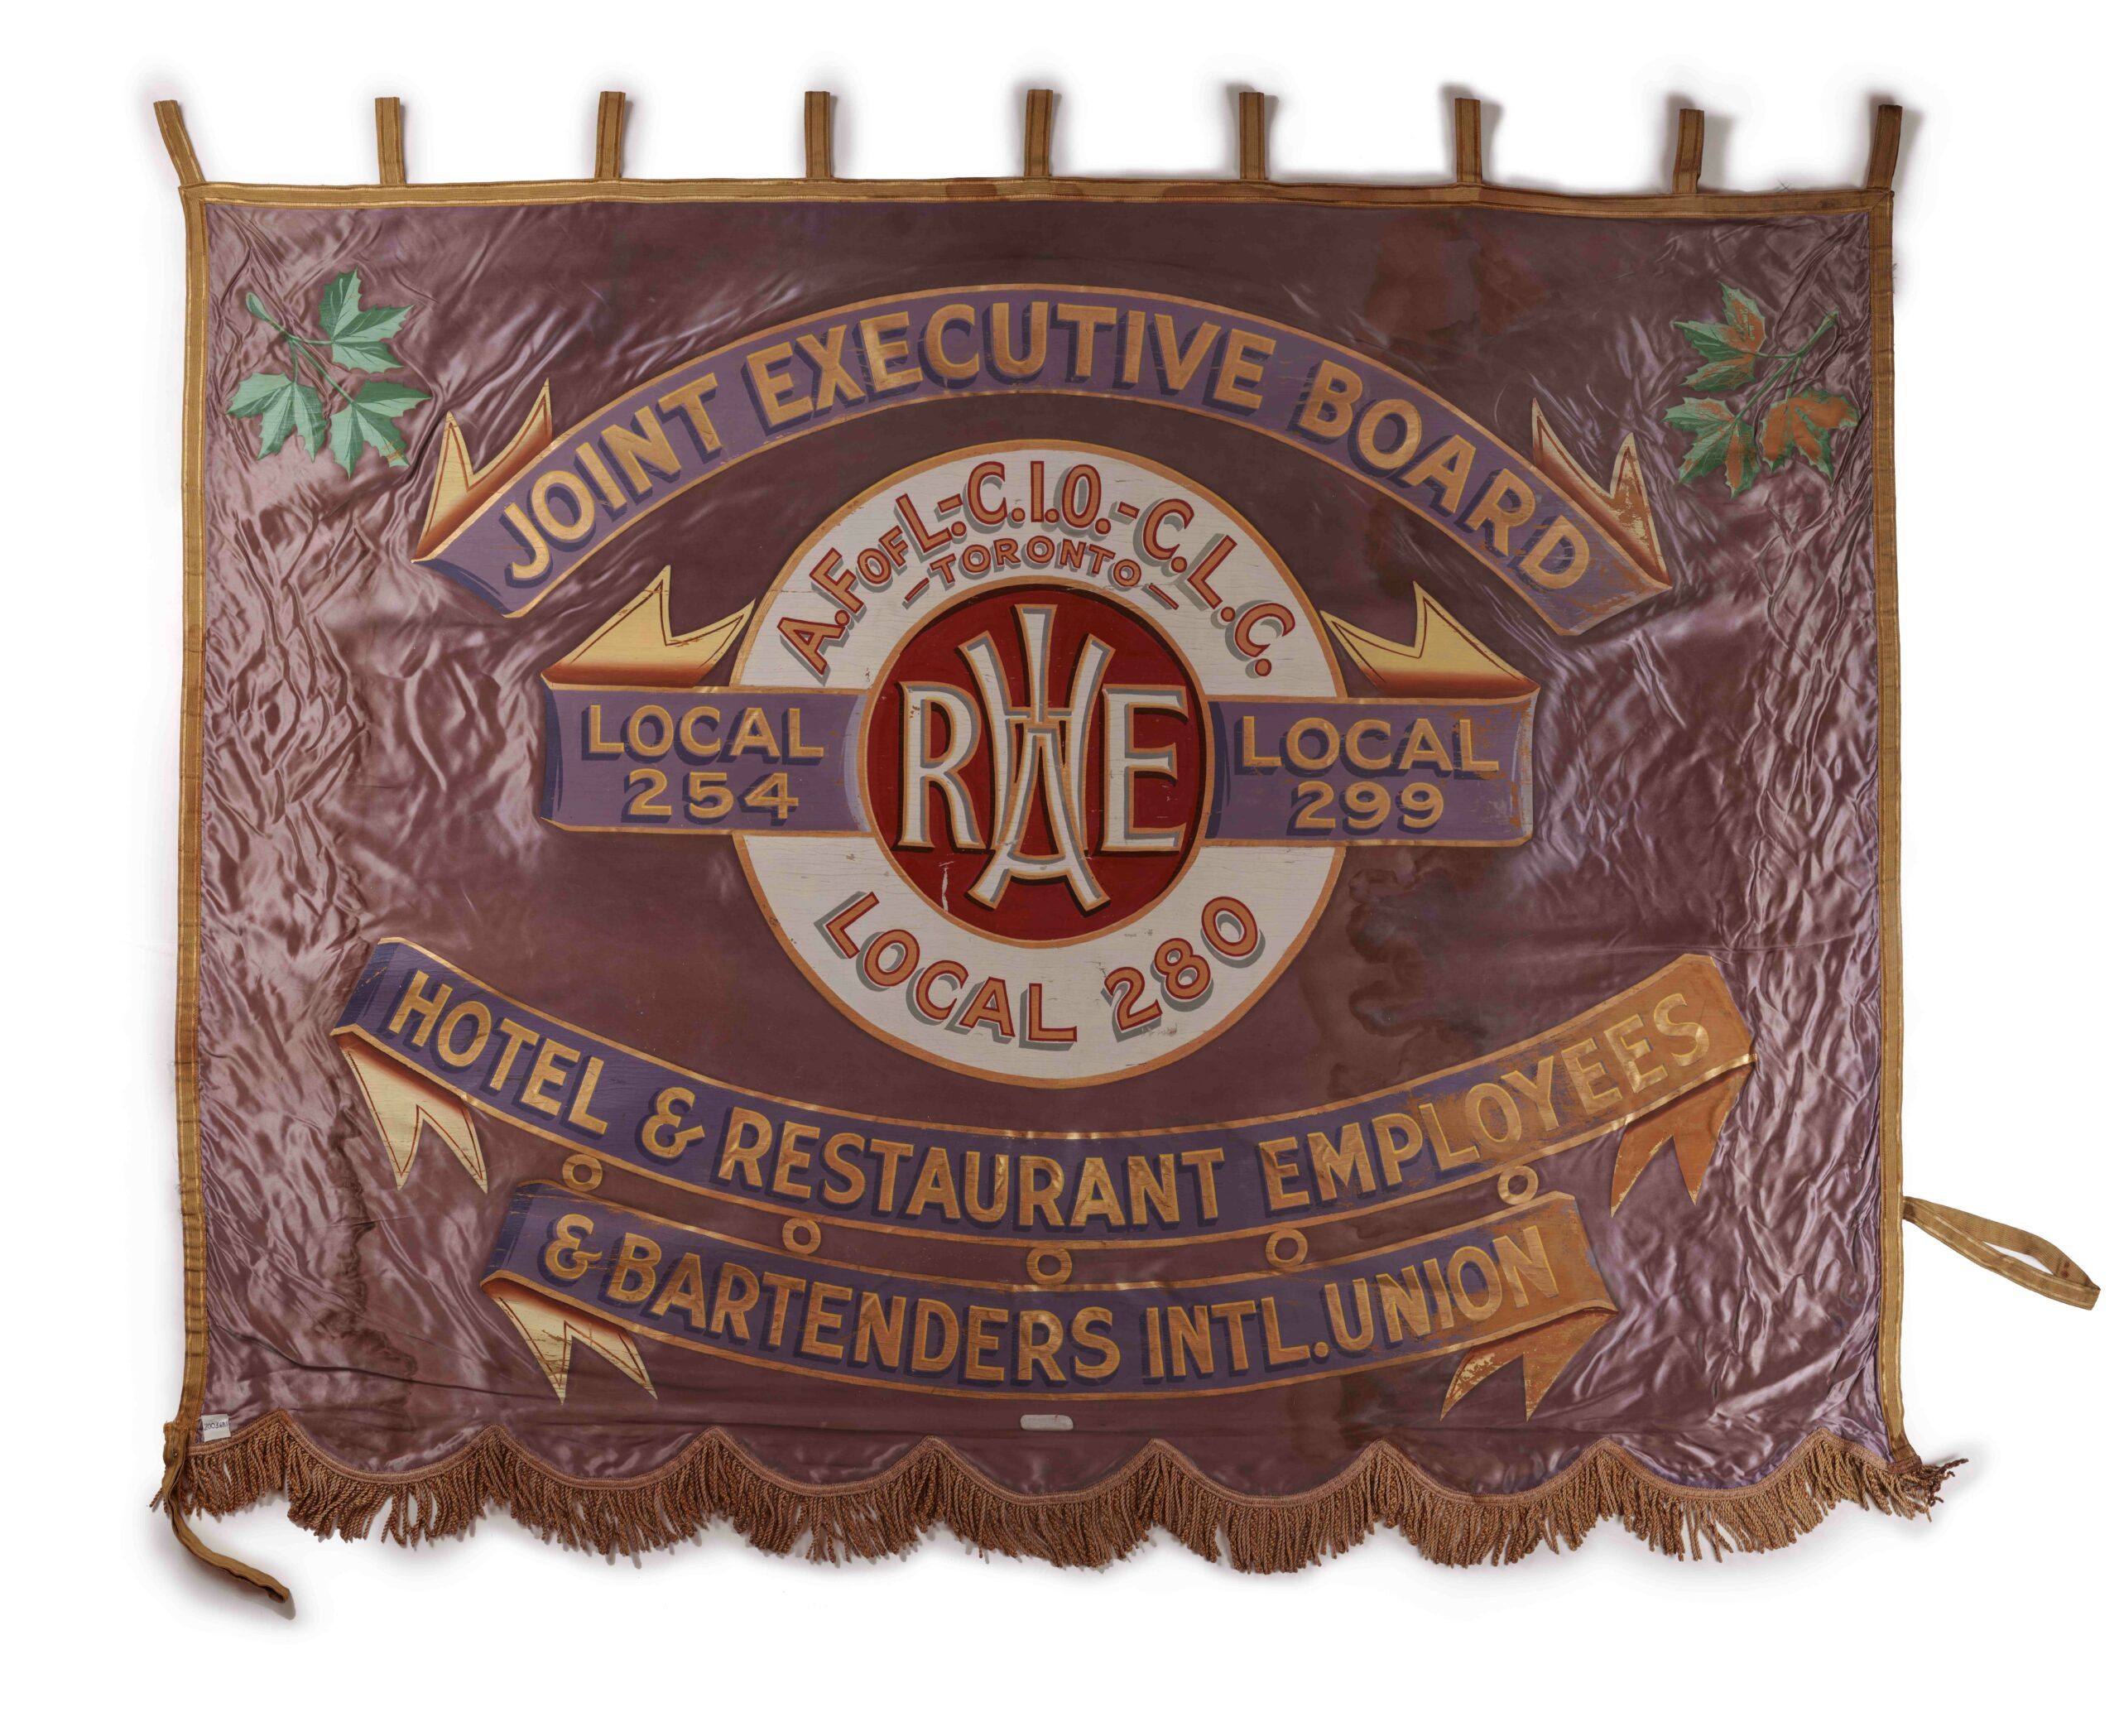 Banner, Joint Executive Board Hotel & Restaurant Employees & Bartenders Locals 254, 280, 299